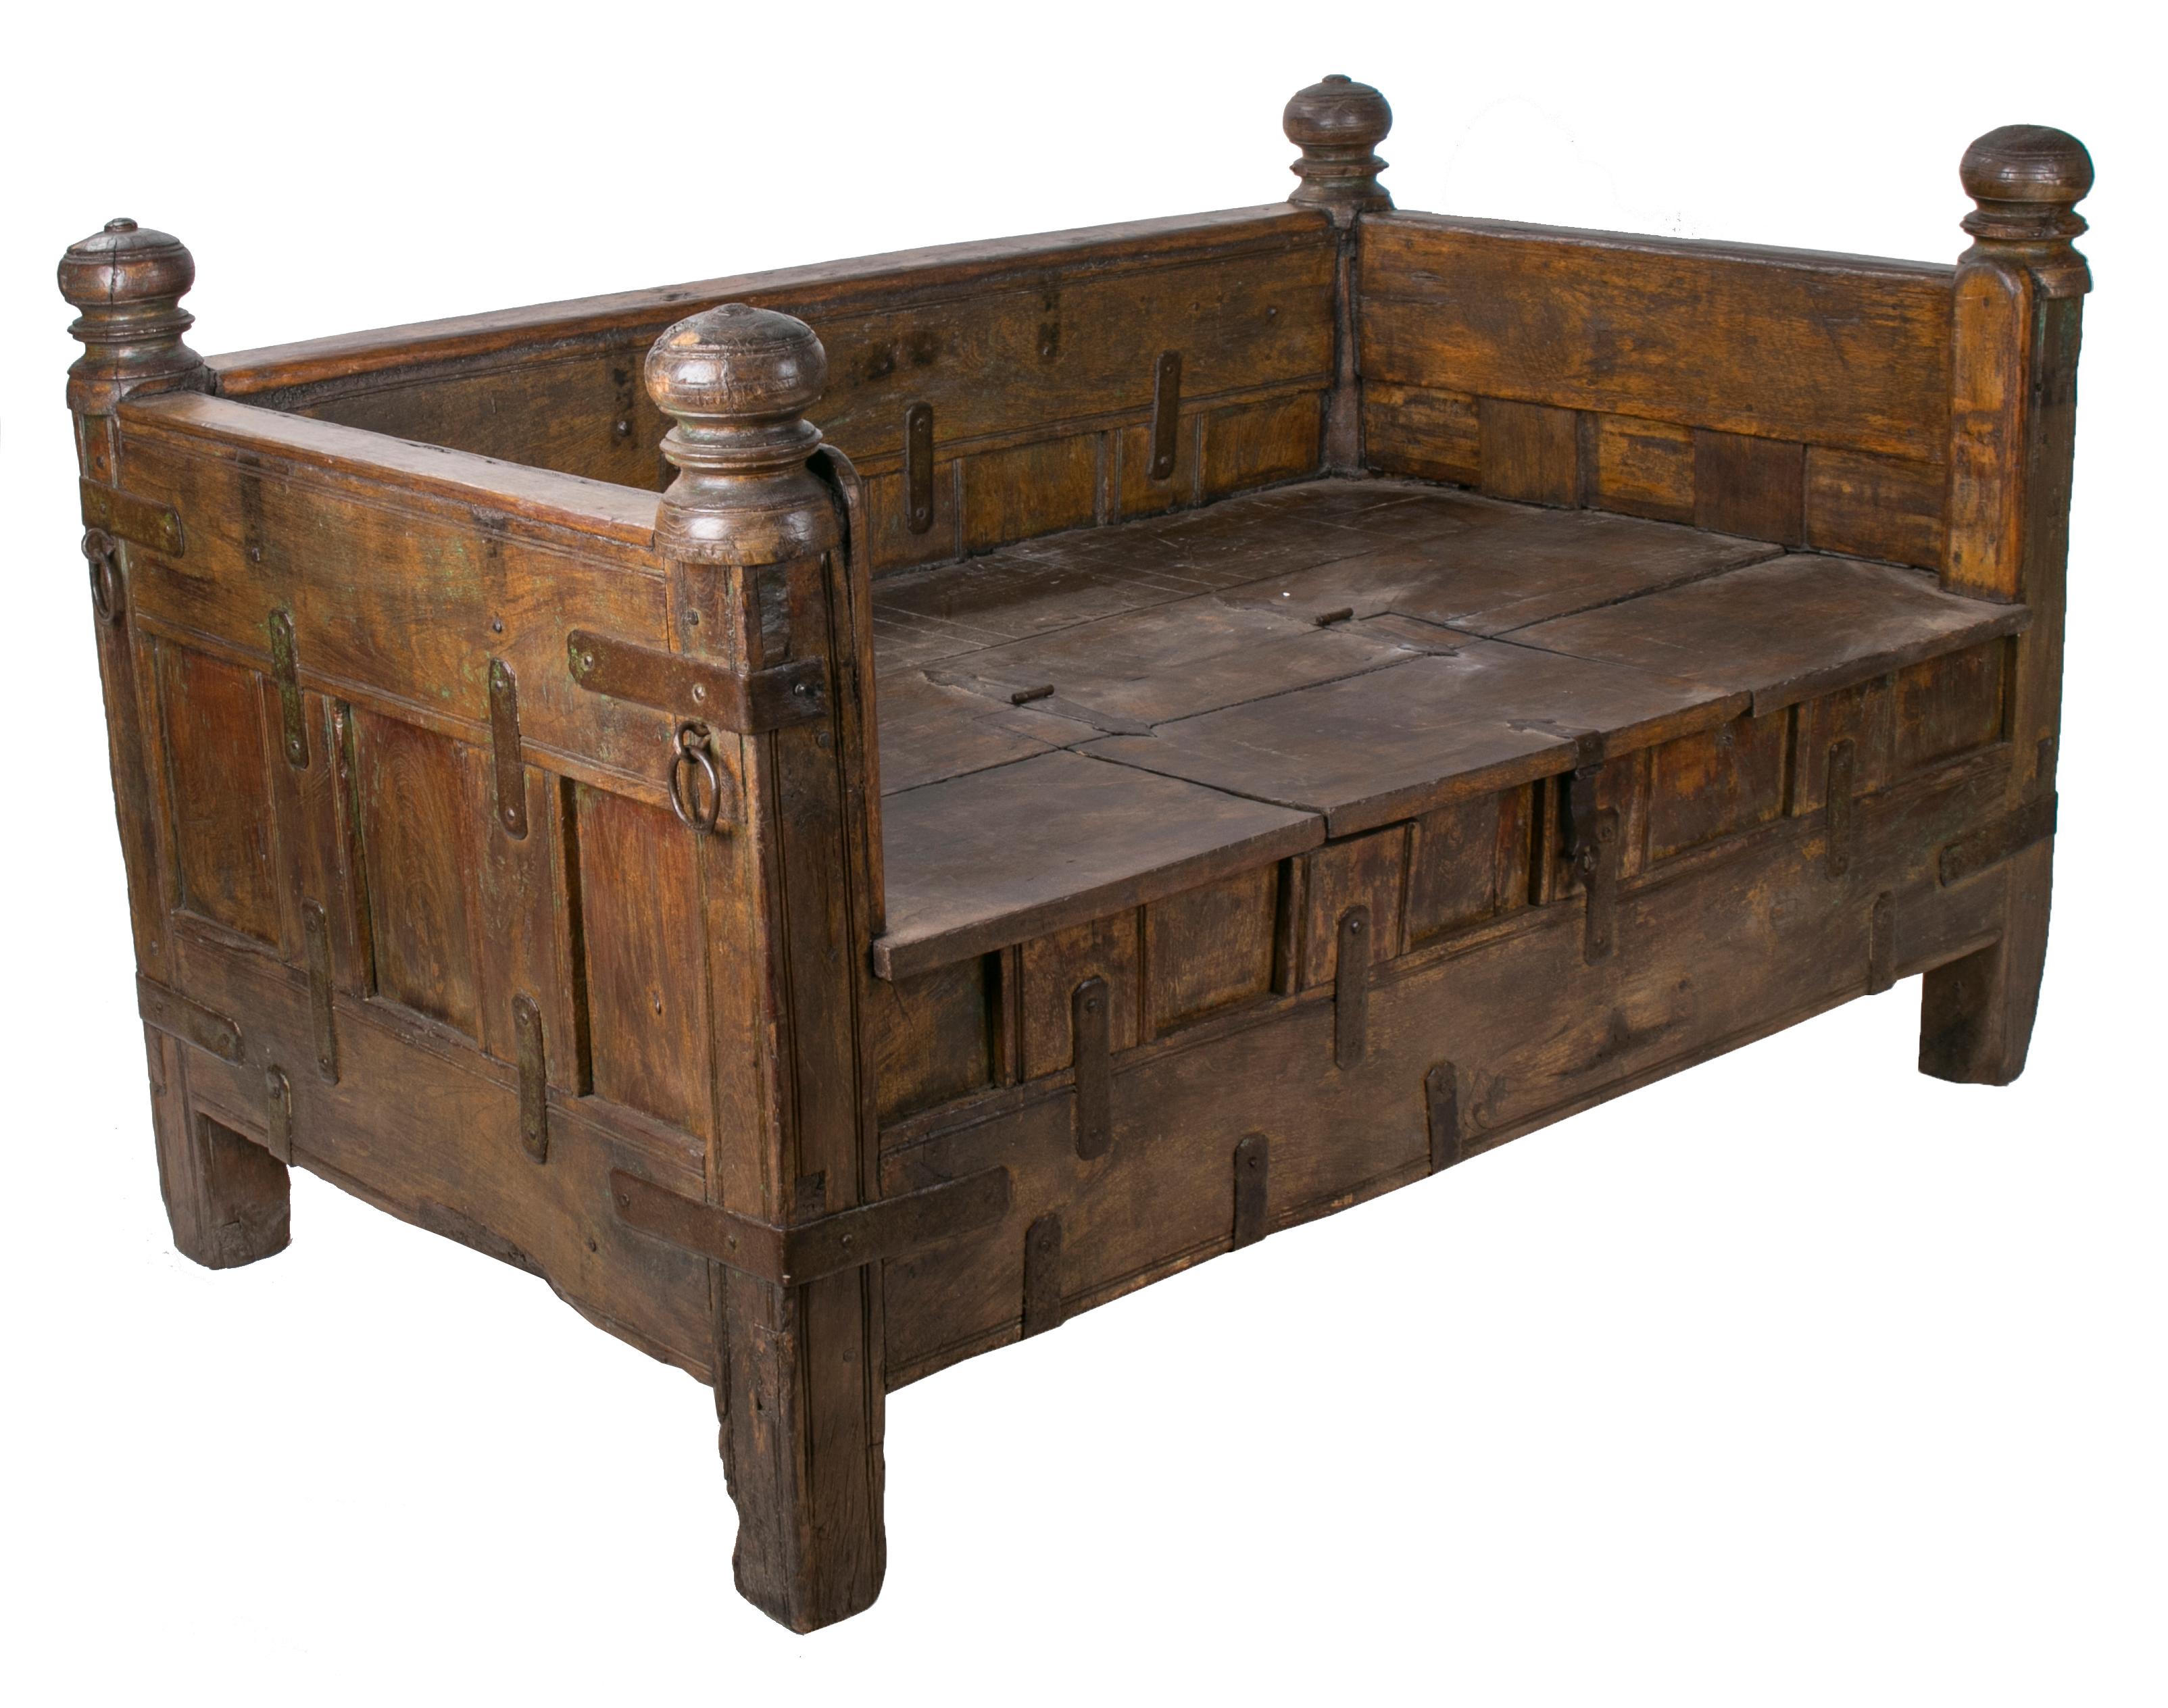 Indian hand carved iron bound teak bench with hinged seat.